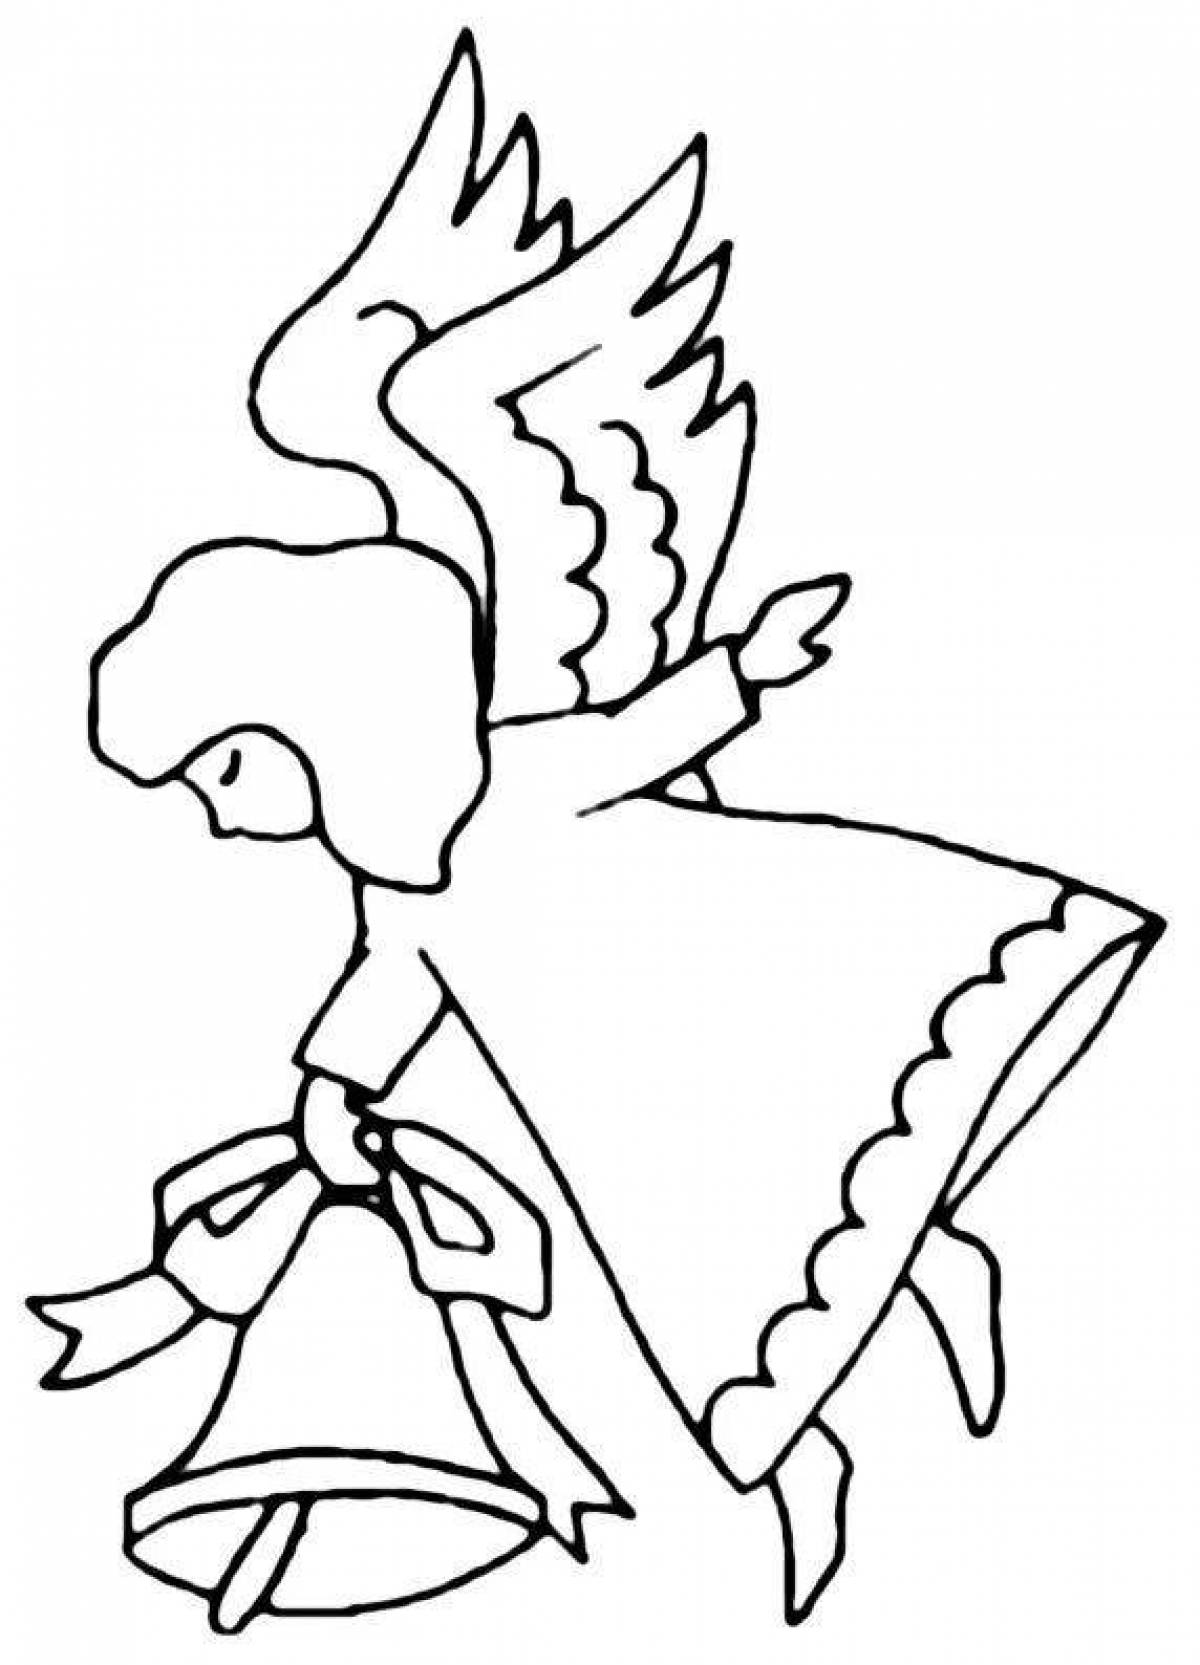 Majestic Christmas angel coloring page